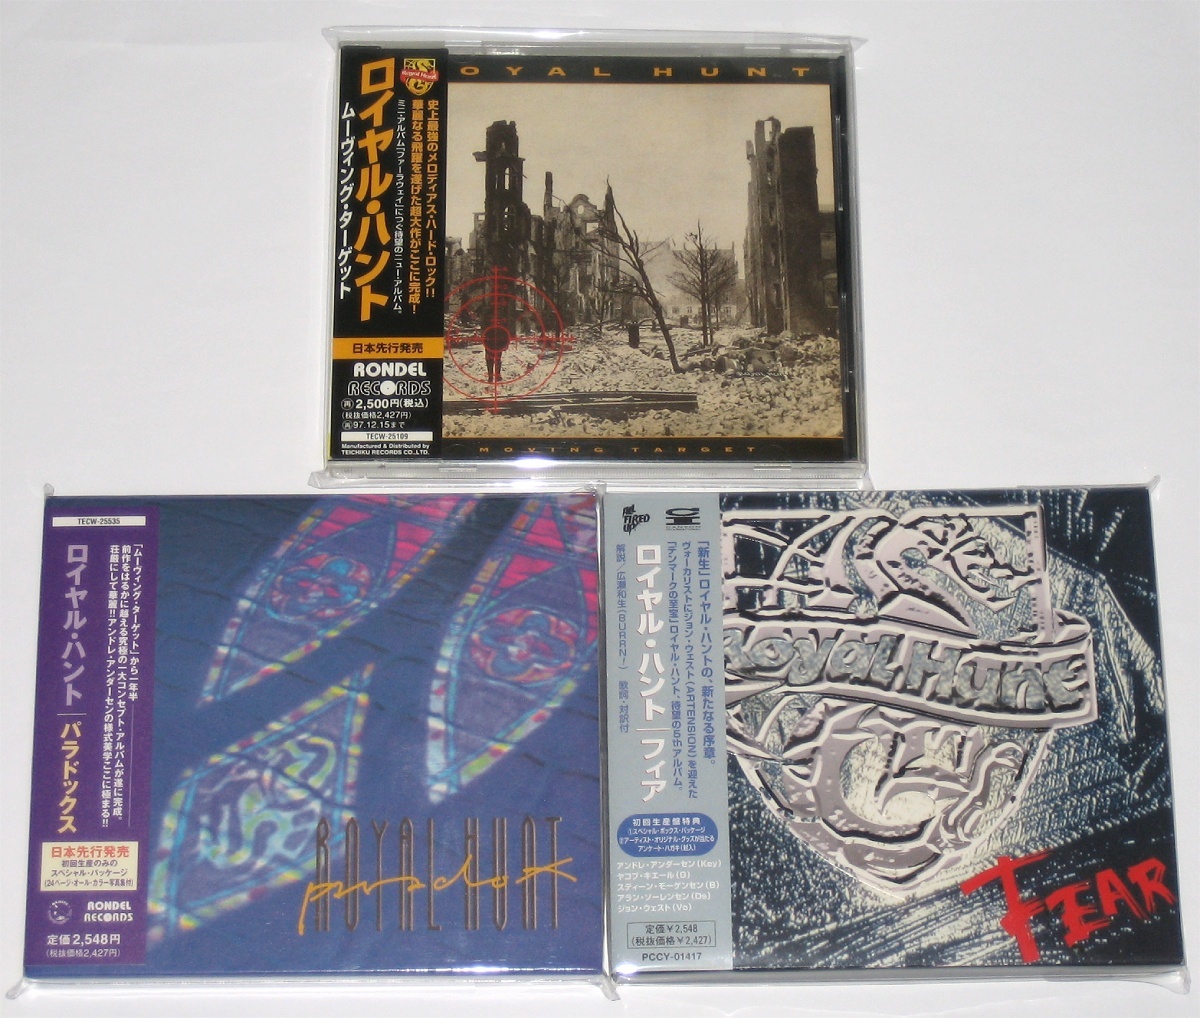  Royal * handle to the first times domestic record CD 7 pieces set (Royal Hunt 7 CDs, Japanese First Edition)